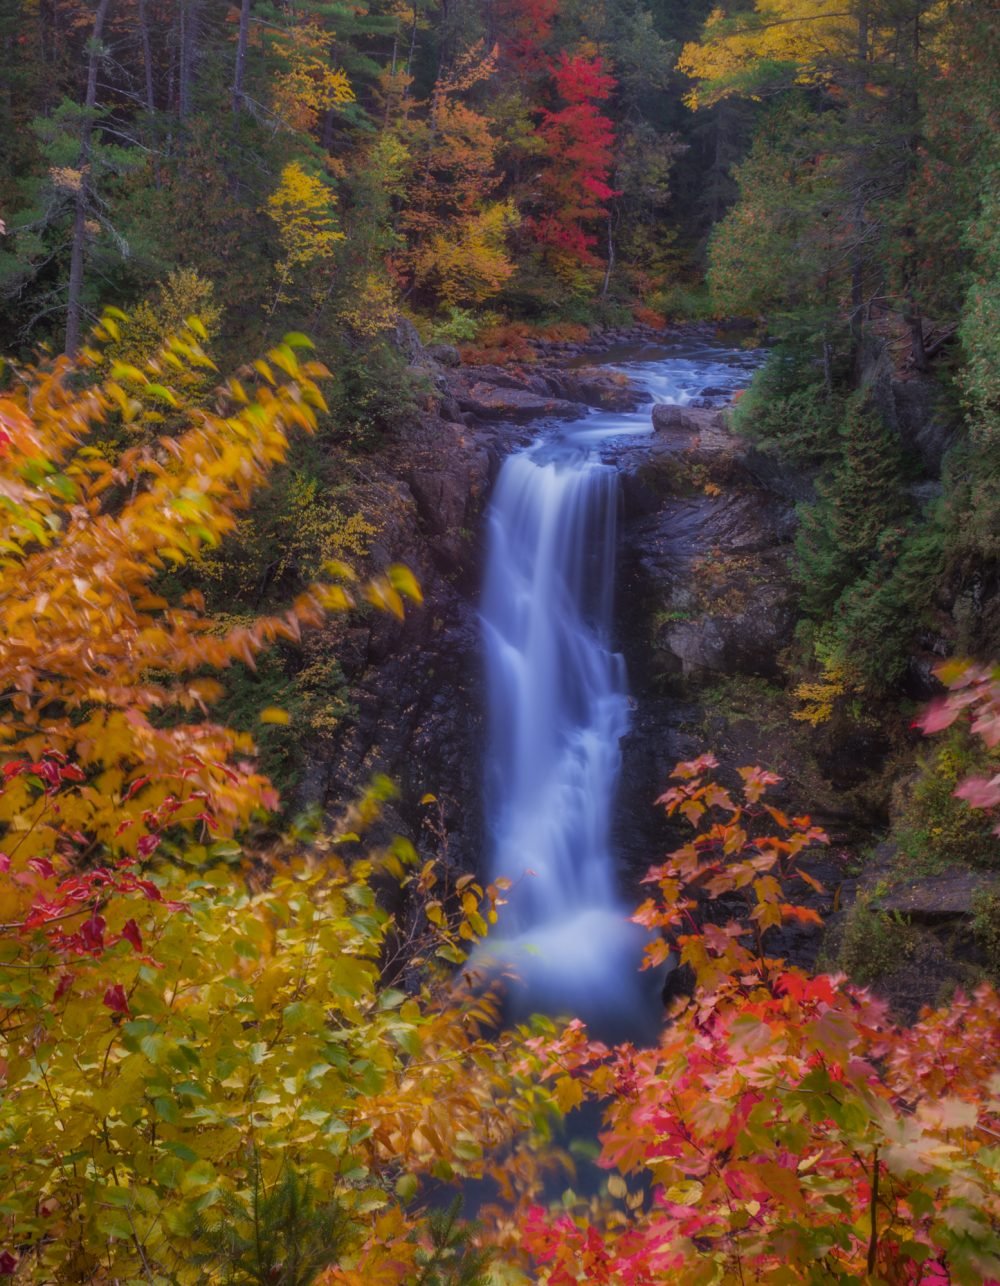 Bright Maine Fall colors frame a 100' waterfall